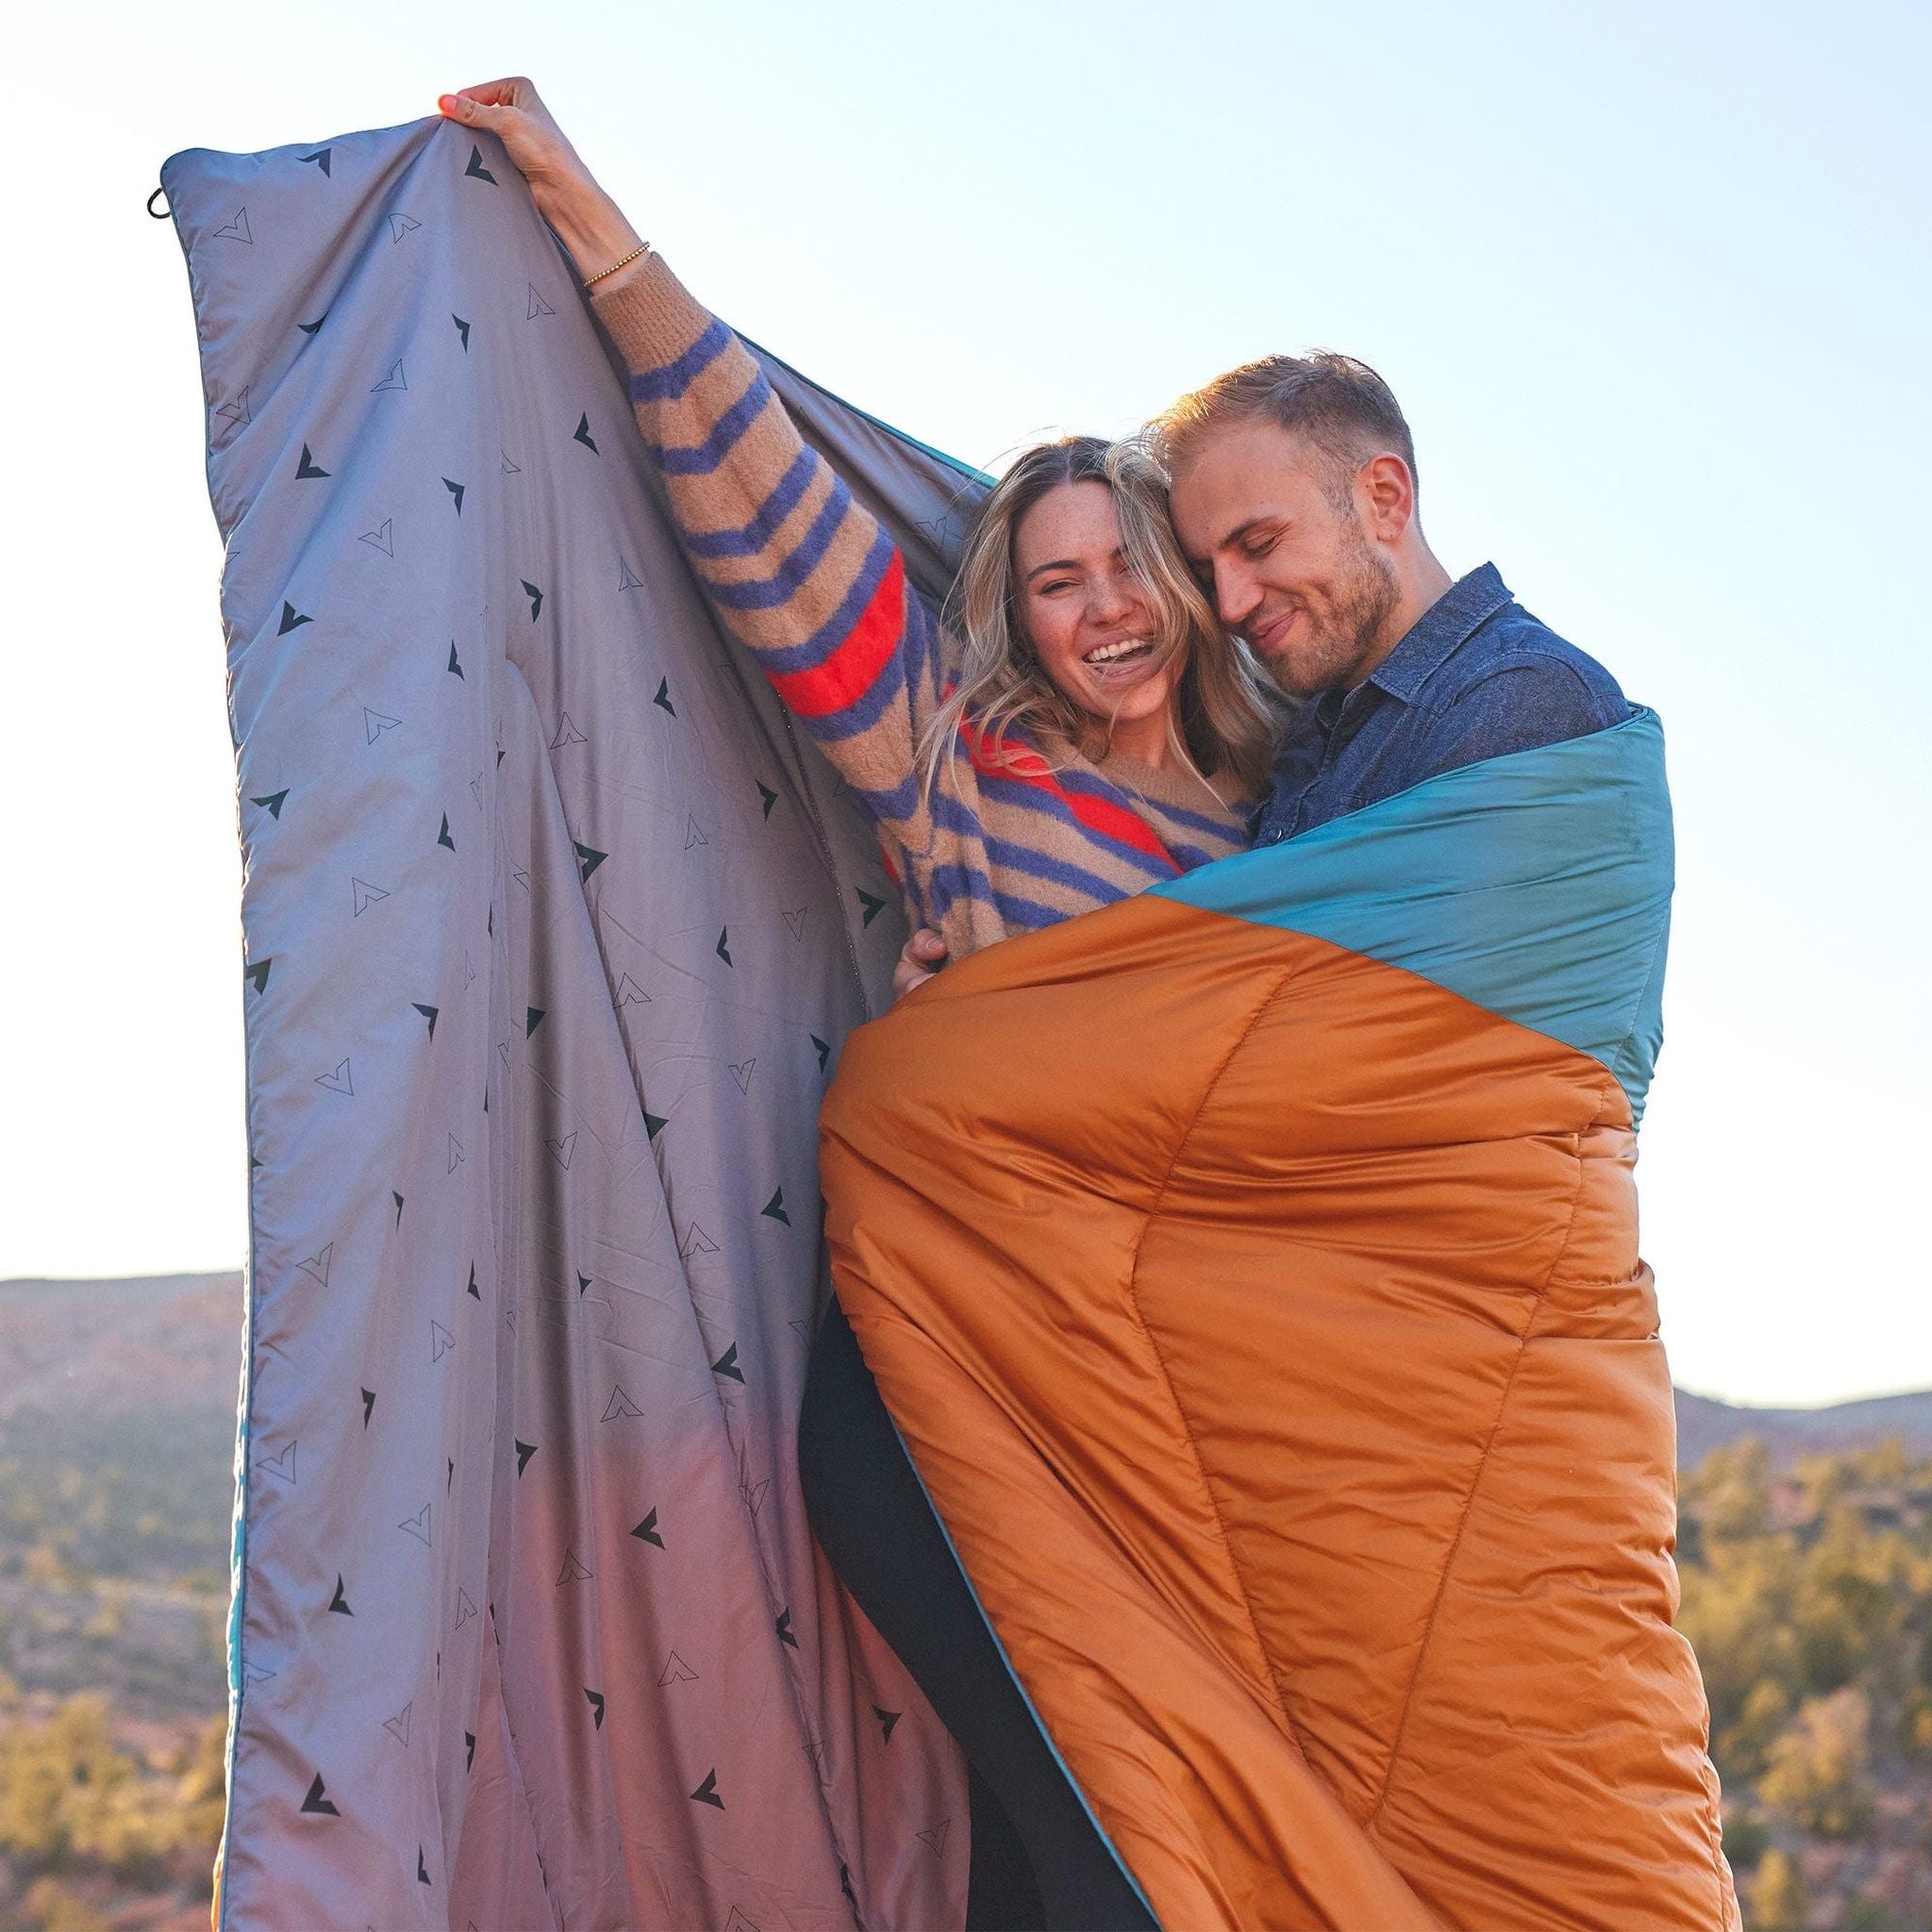 Teton Sports Acadia Mammoth Outdoor Camp Blanket in Teal/Copper